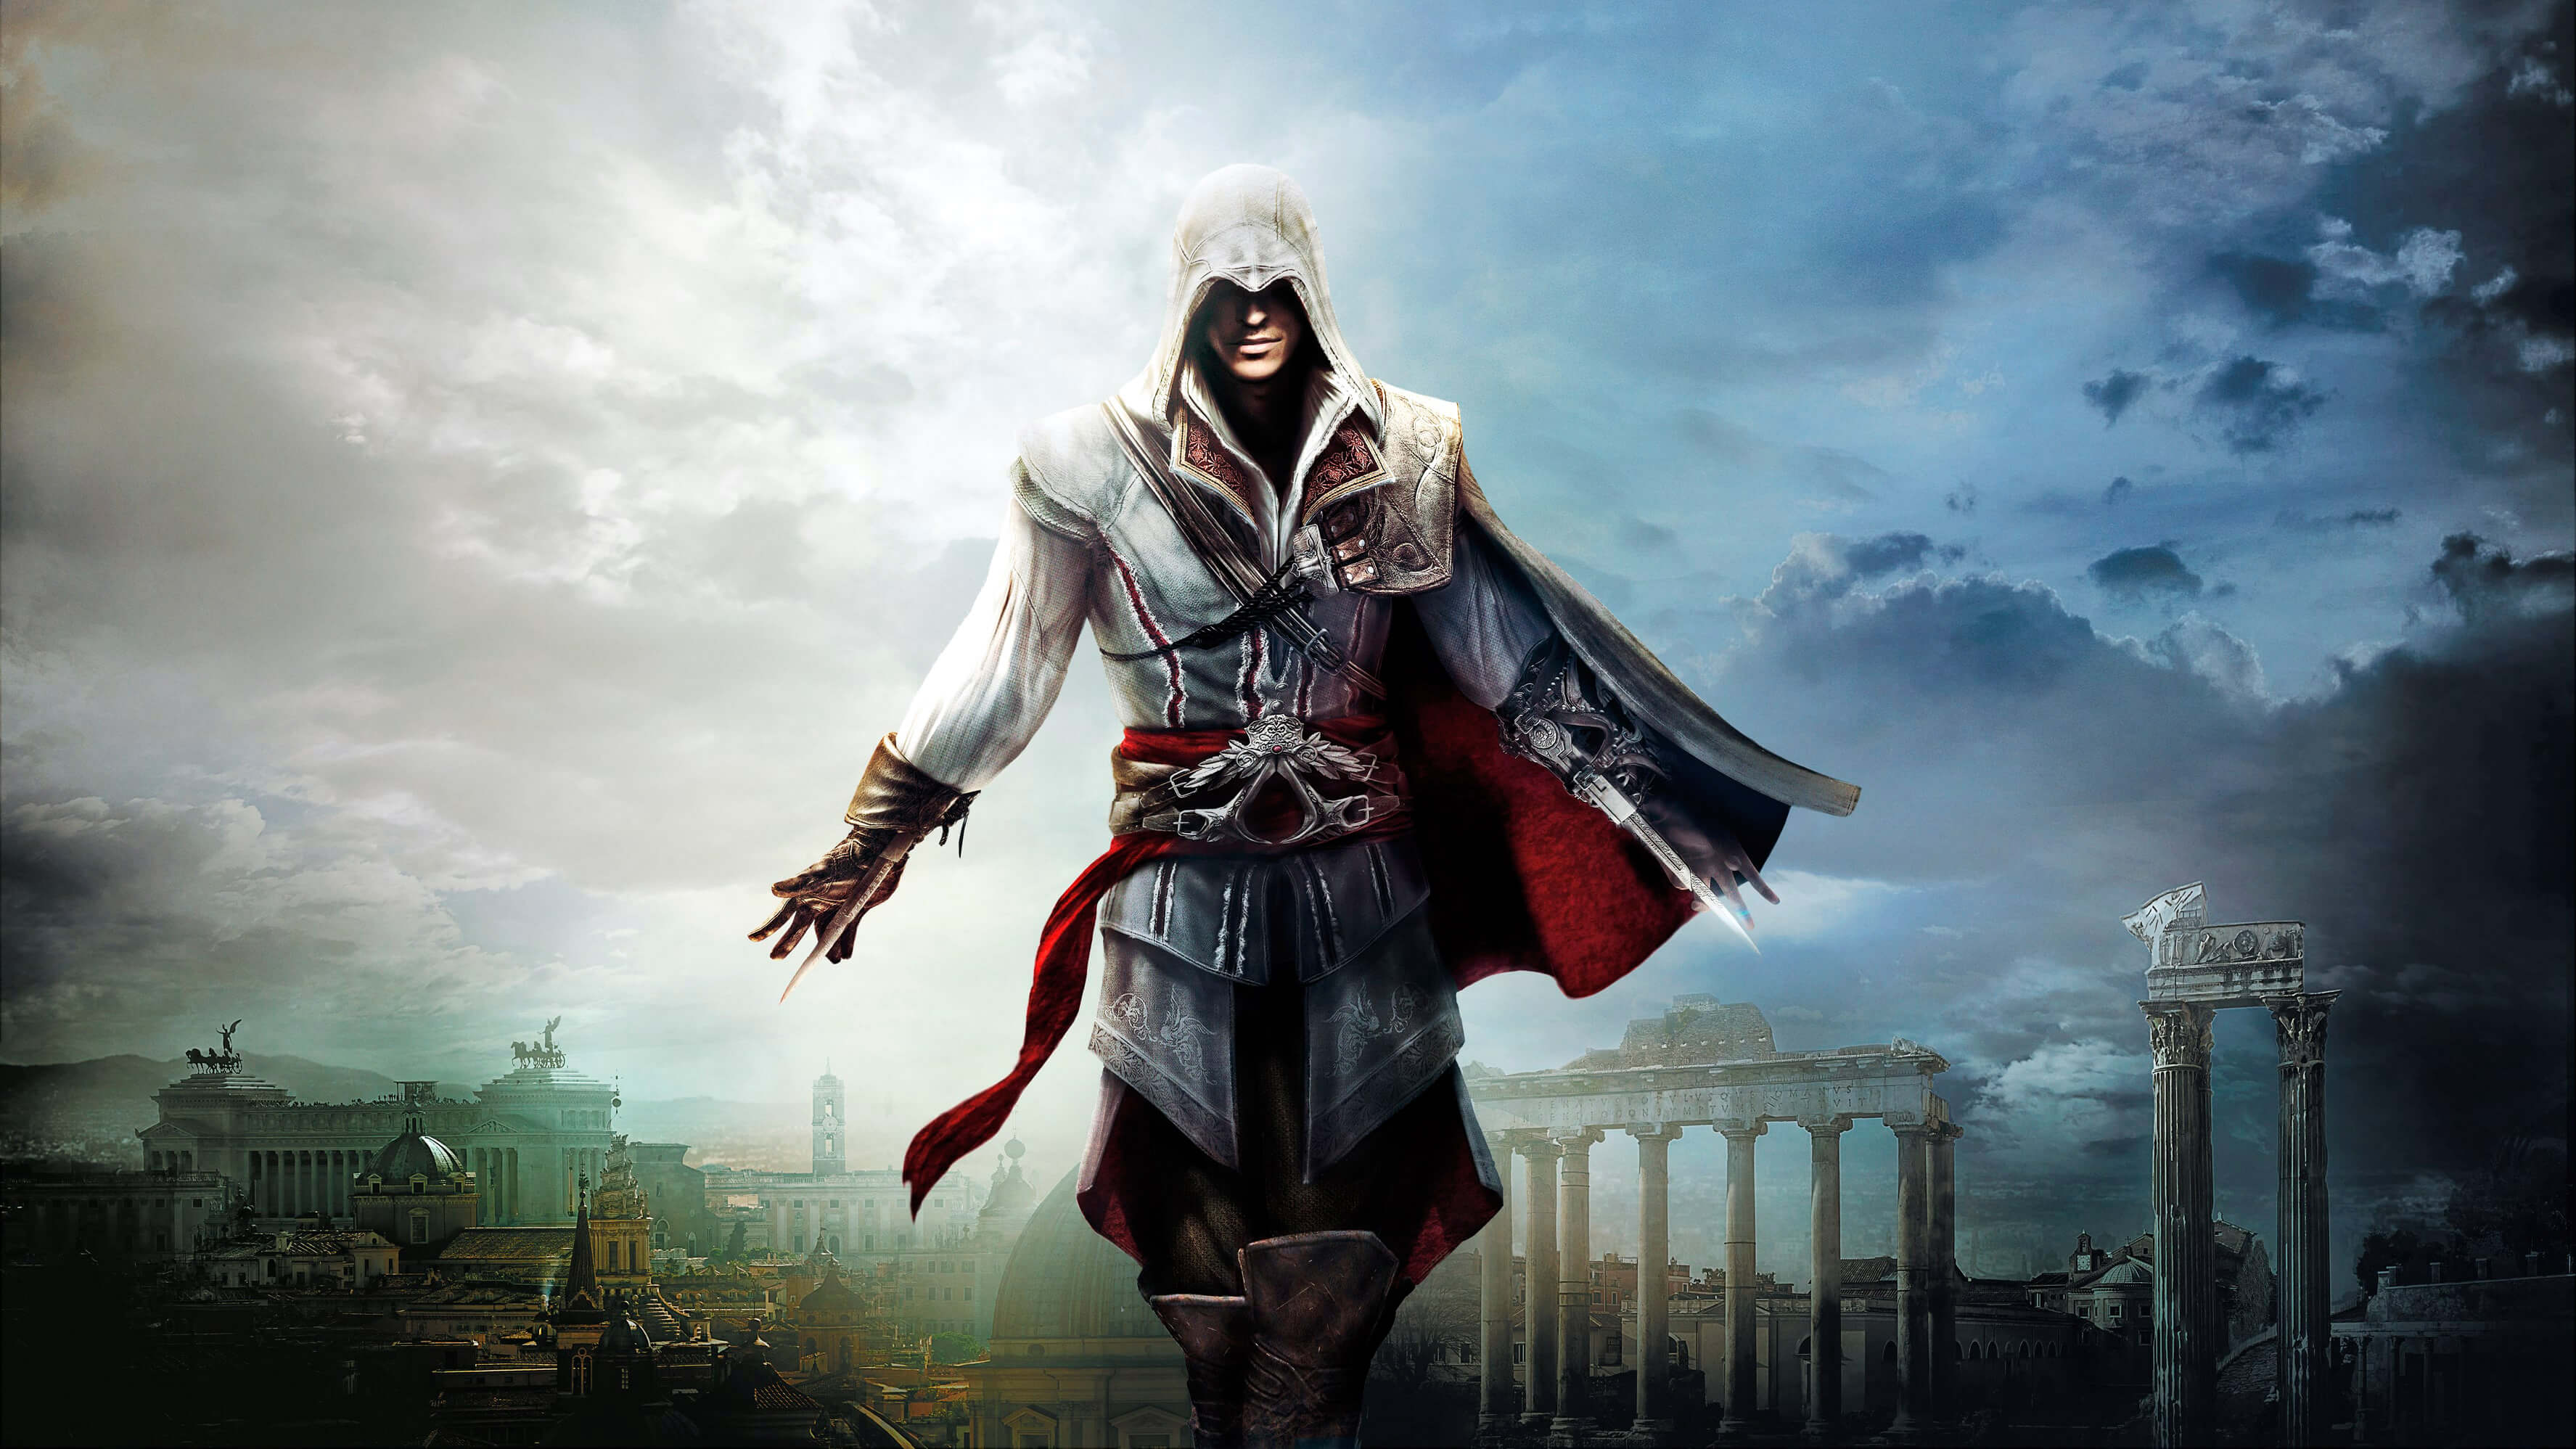 4k Wallpaper Assassin's Creed 3550x High Resolution · The Big Photo